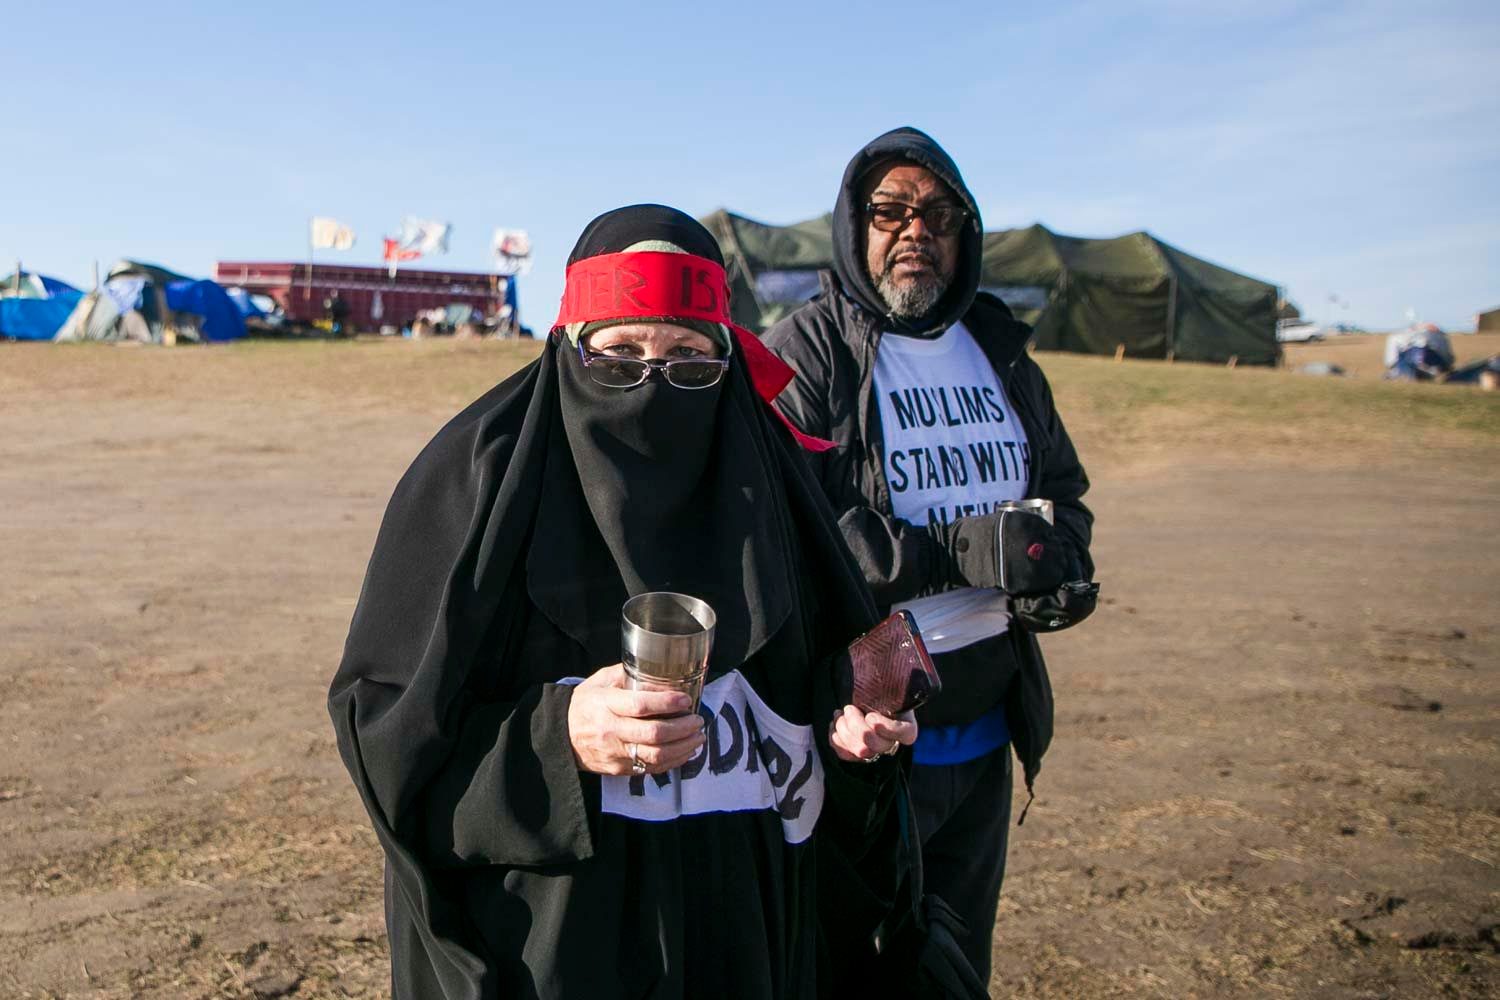 Safiyyah Abdullah and Basil Abdul Khabir on the day they arrived at Oceti Sakowin camp in North Dakota. October 9, 2016. Photo by Pat Nabong/MEDILL 